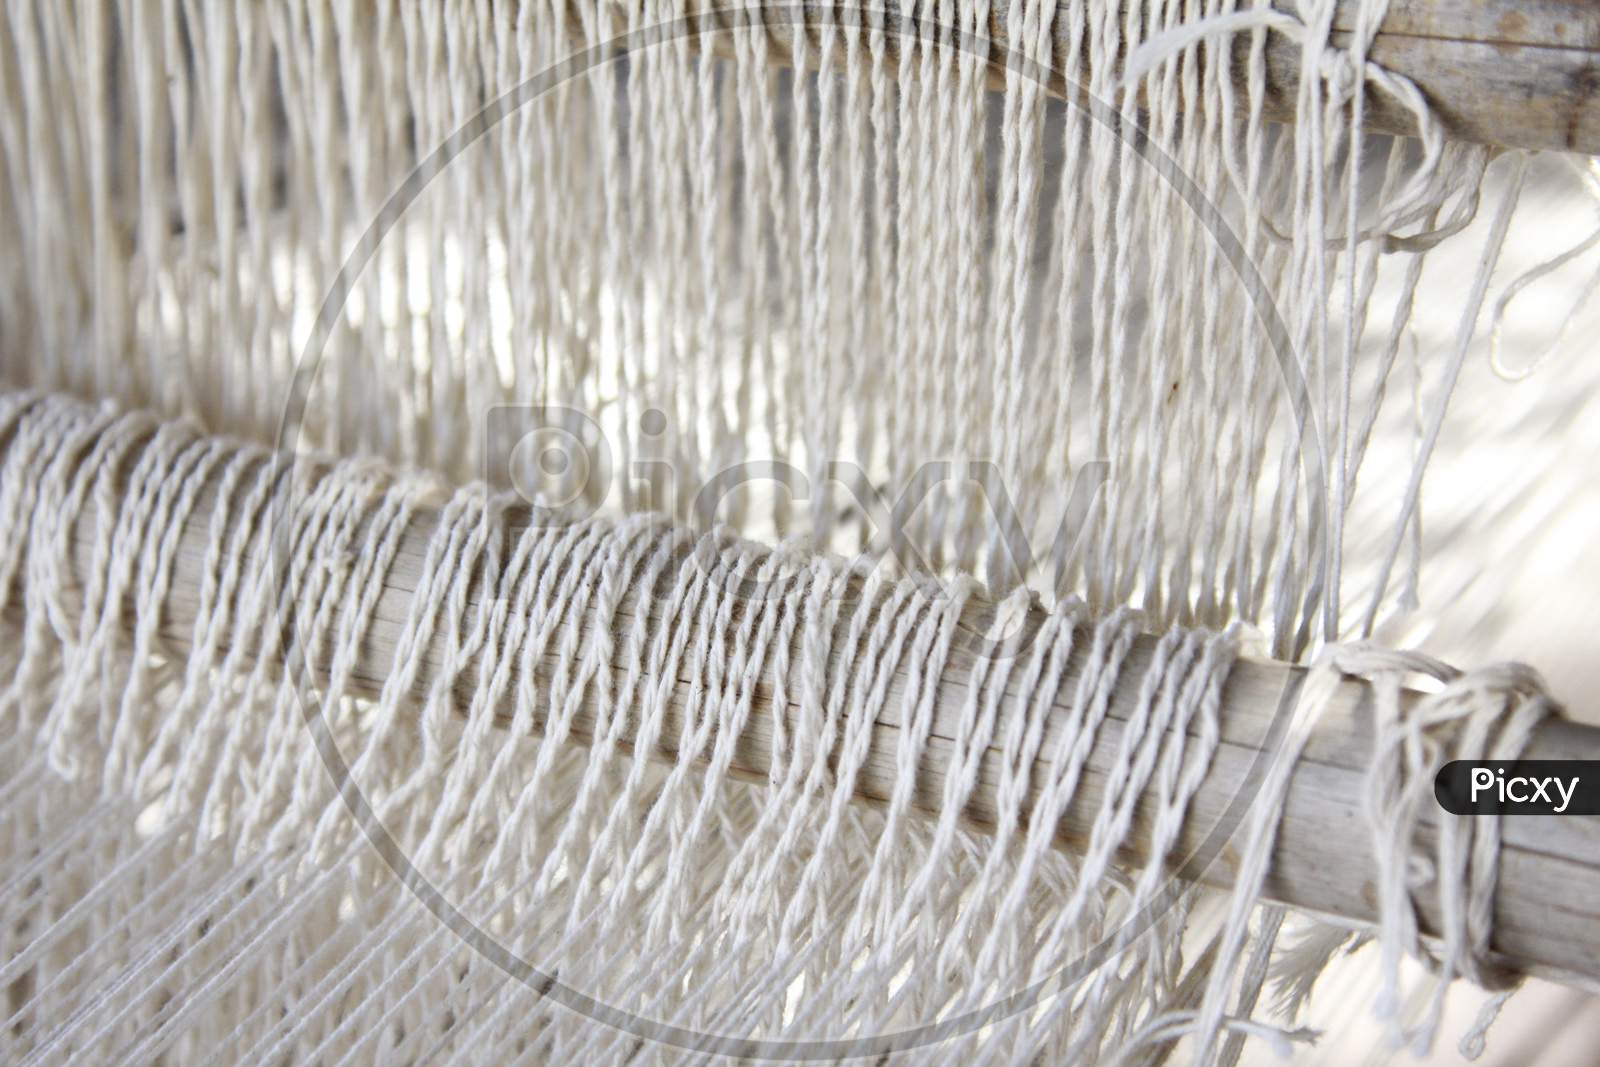 Threads after weaving